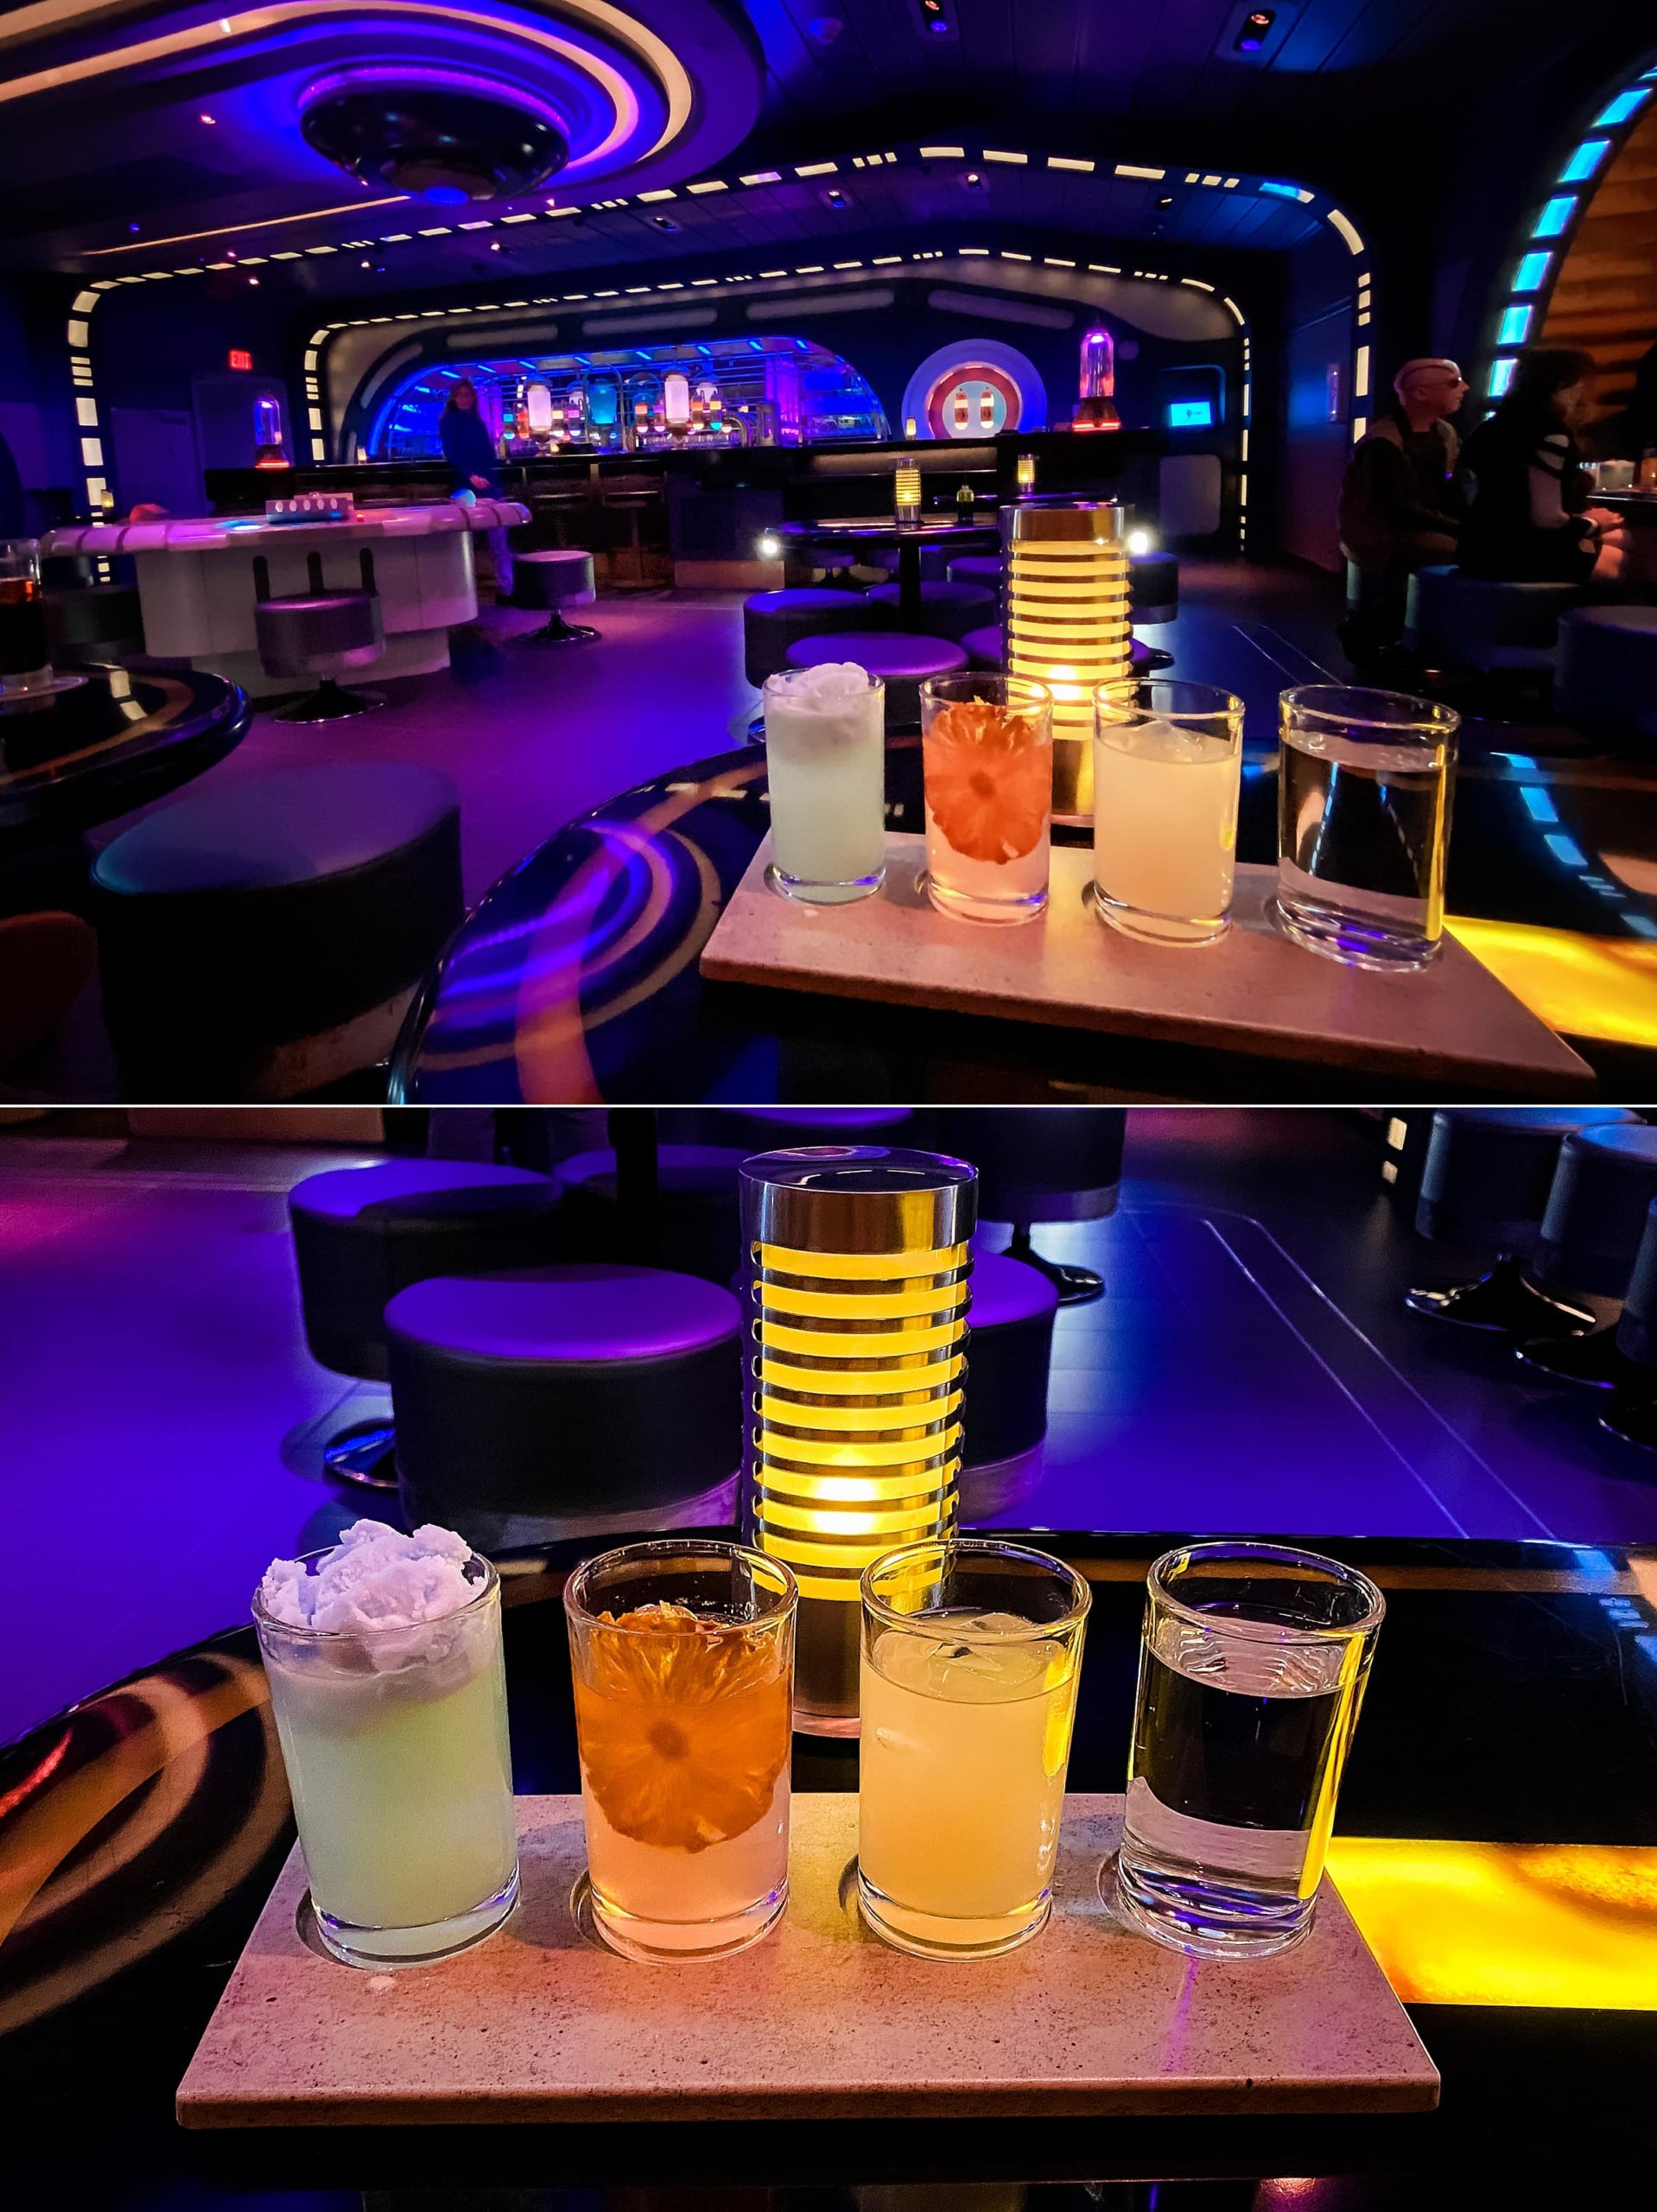 trying mocktails from across the galaxy during our stay at the Star Wars Galactic Starcruiser